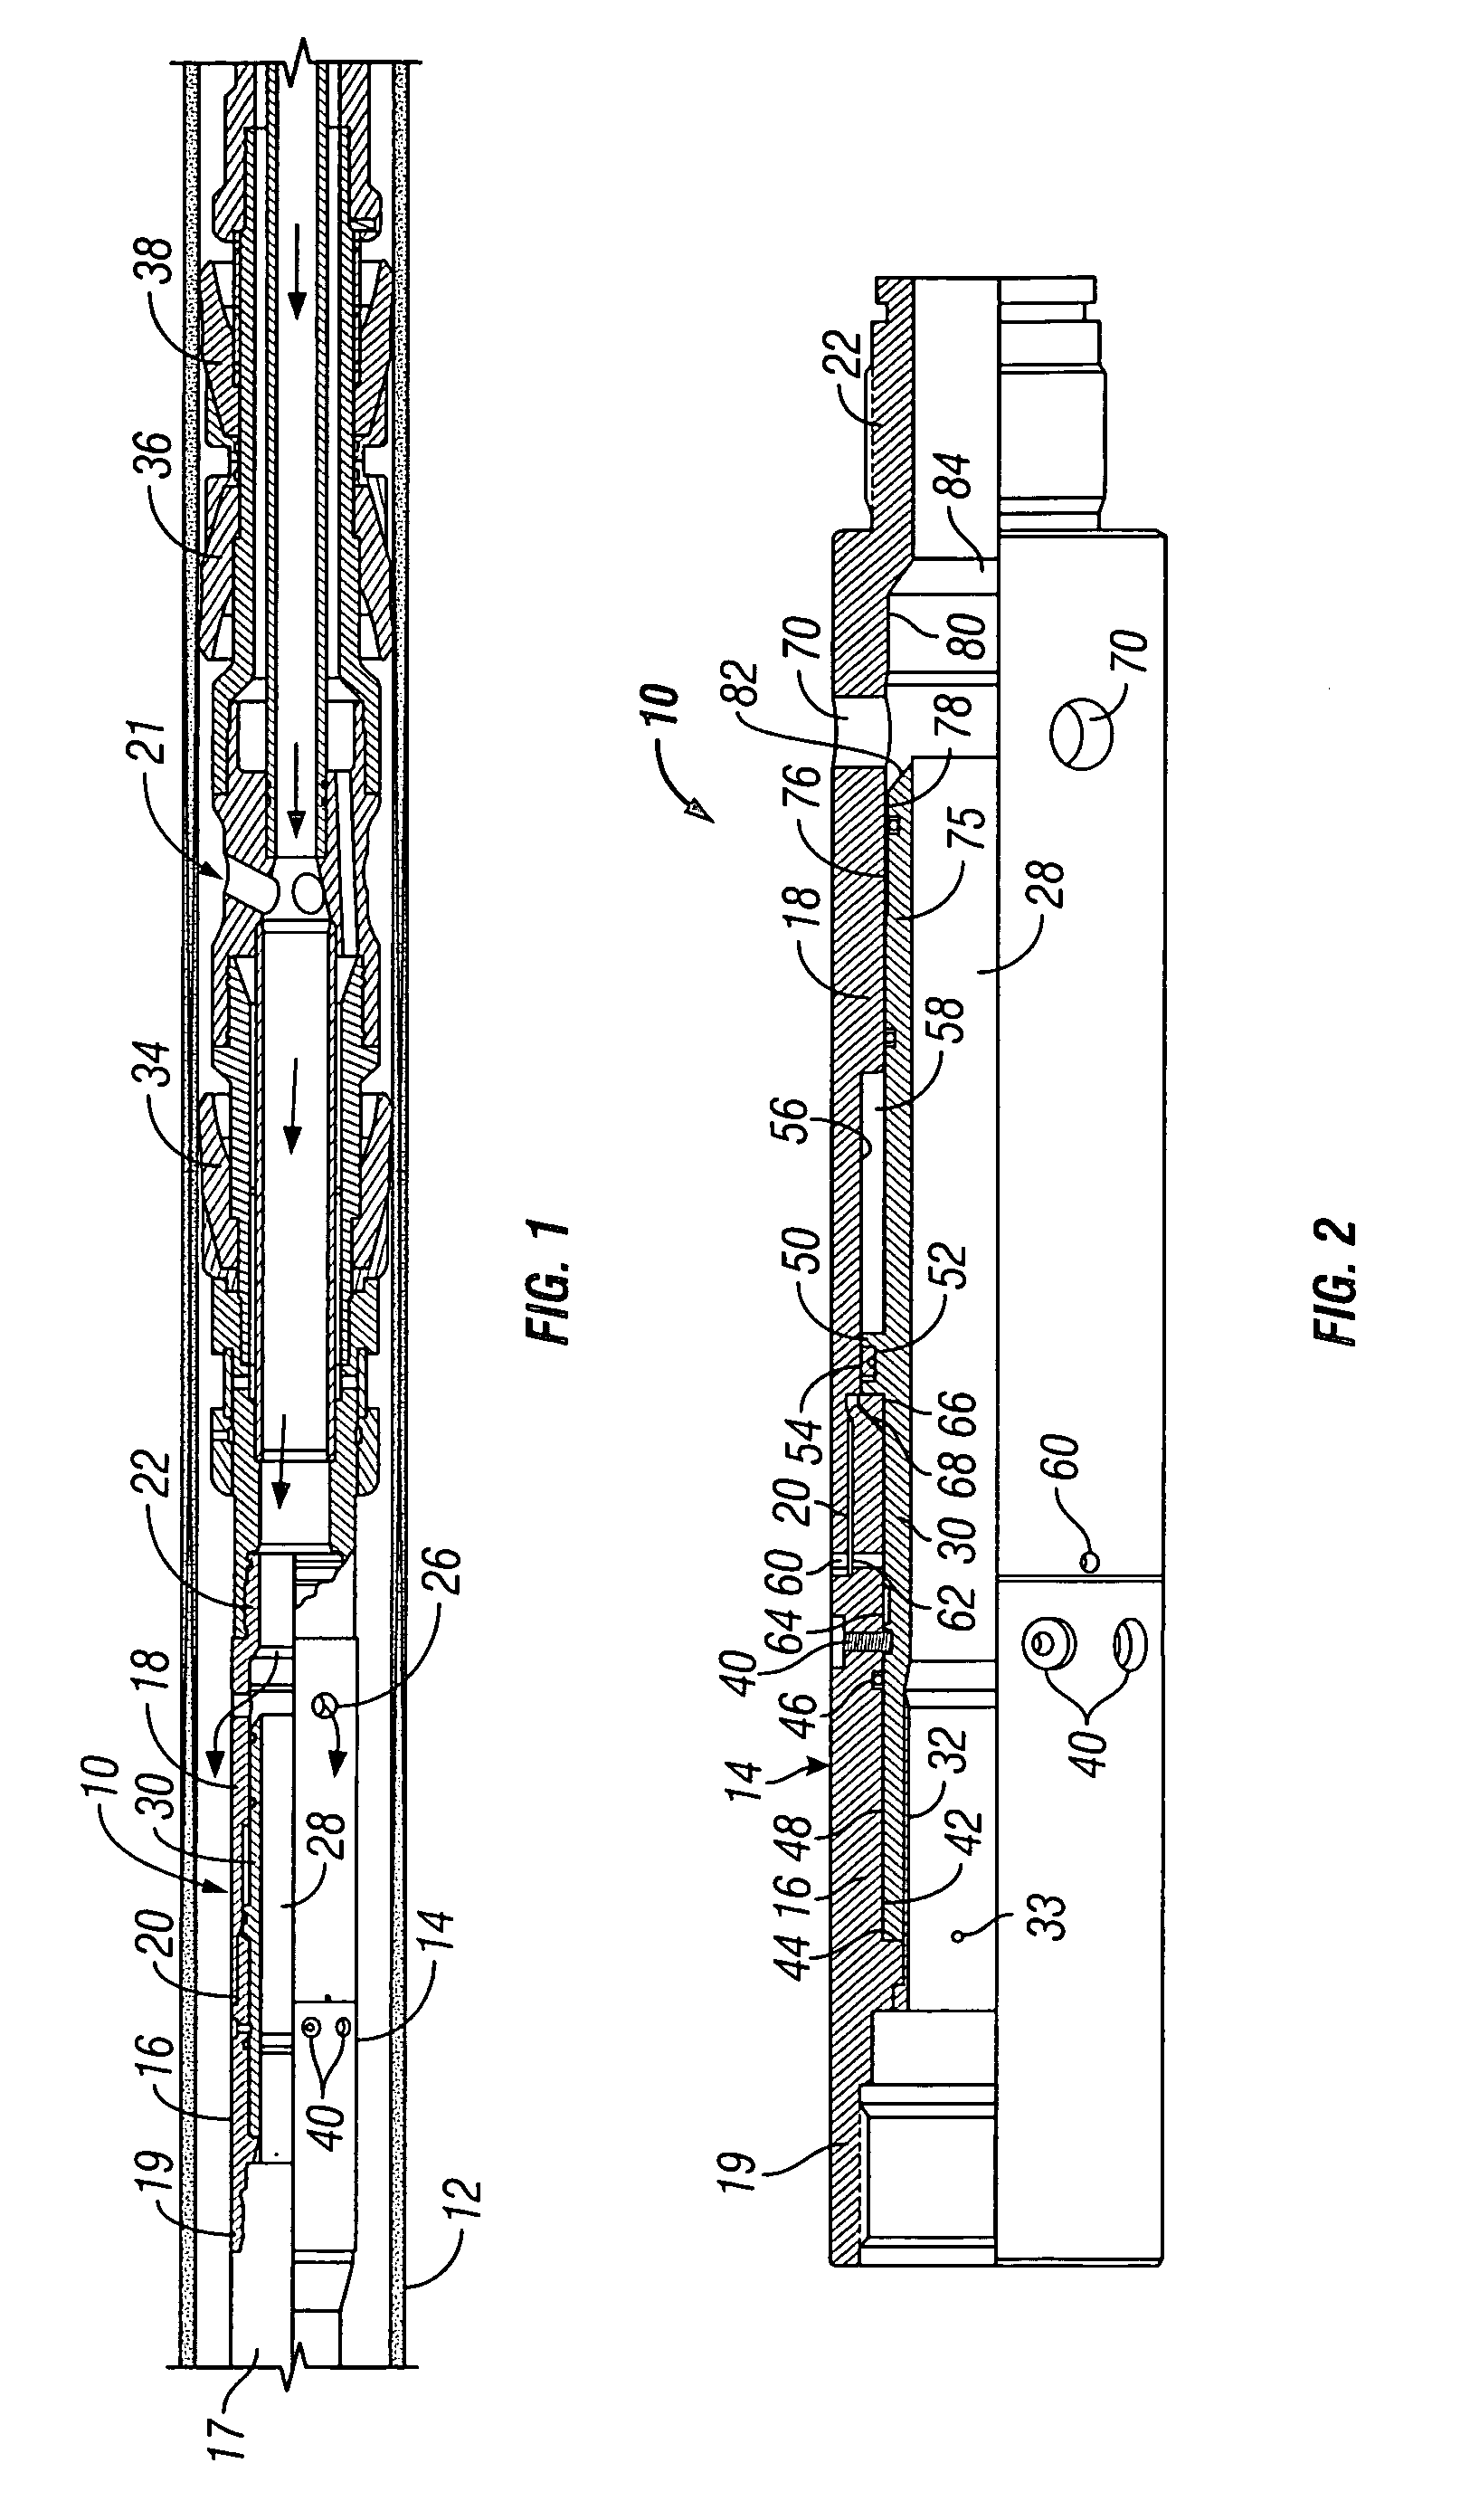 By-pass valve mechanism and method of use hereof